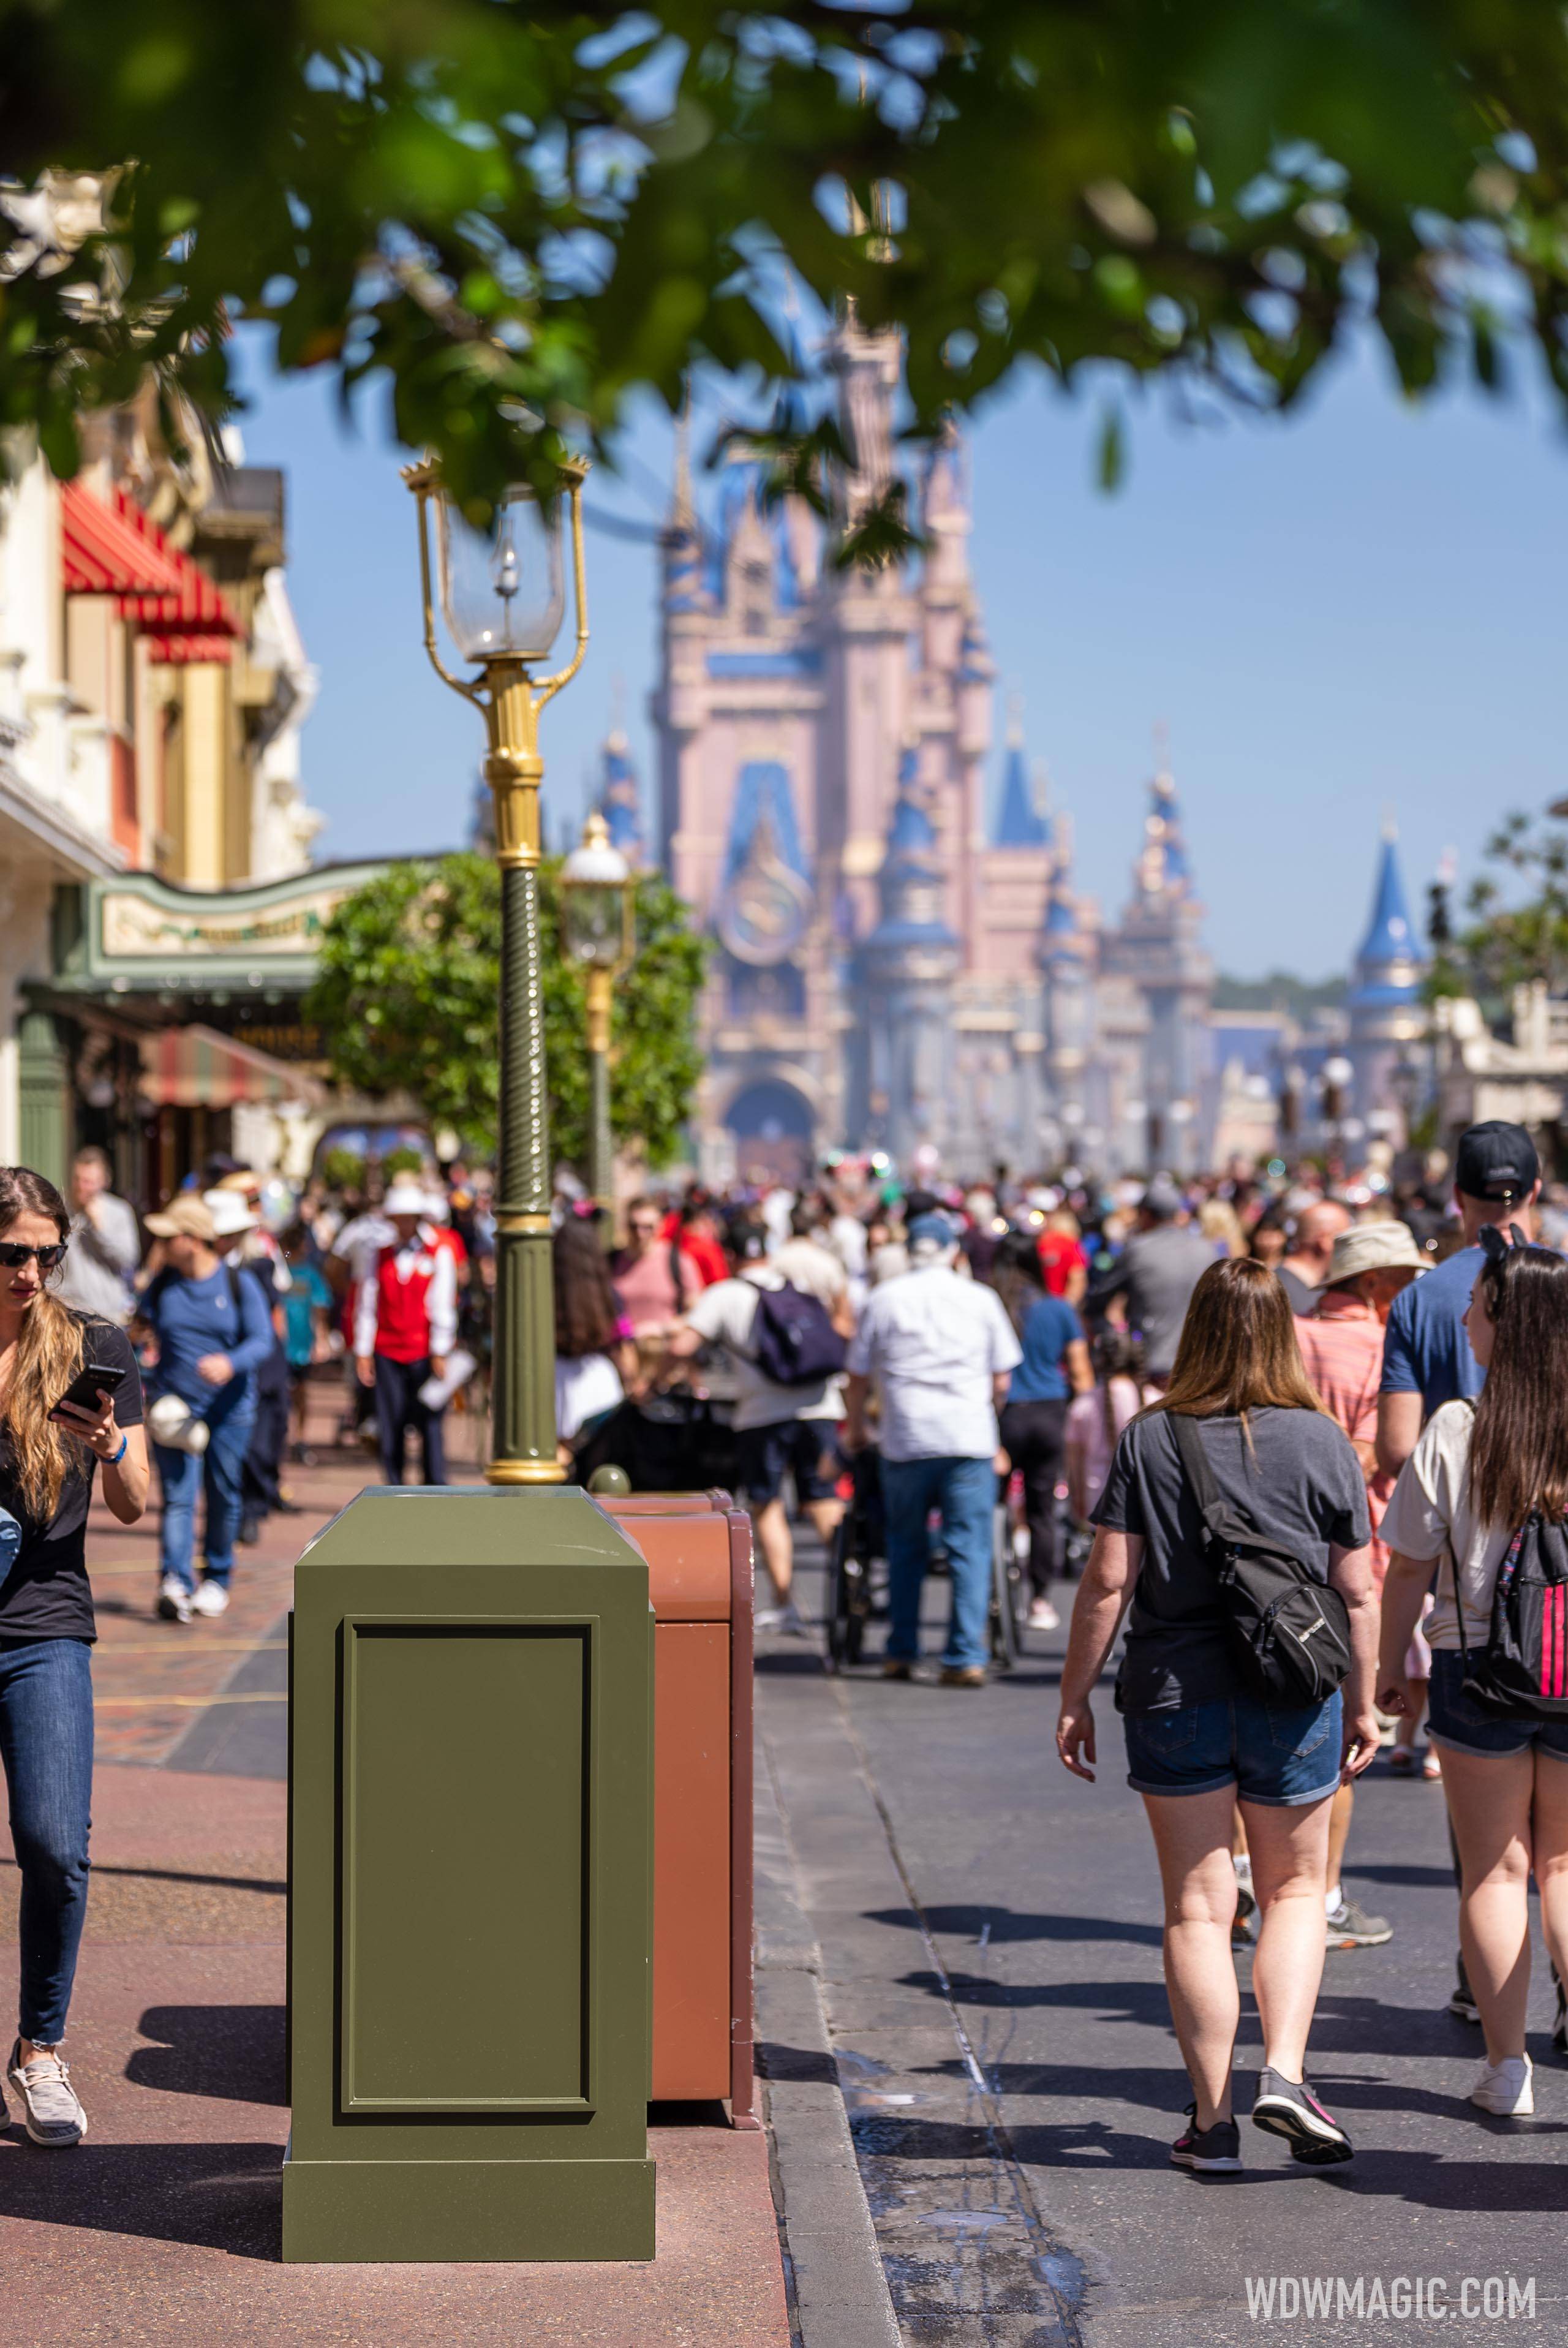 50th edition golden clock removed from Main Street U.S.A. at Magic Kingdom